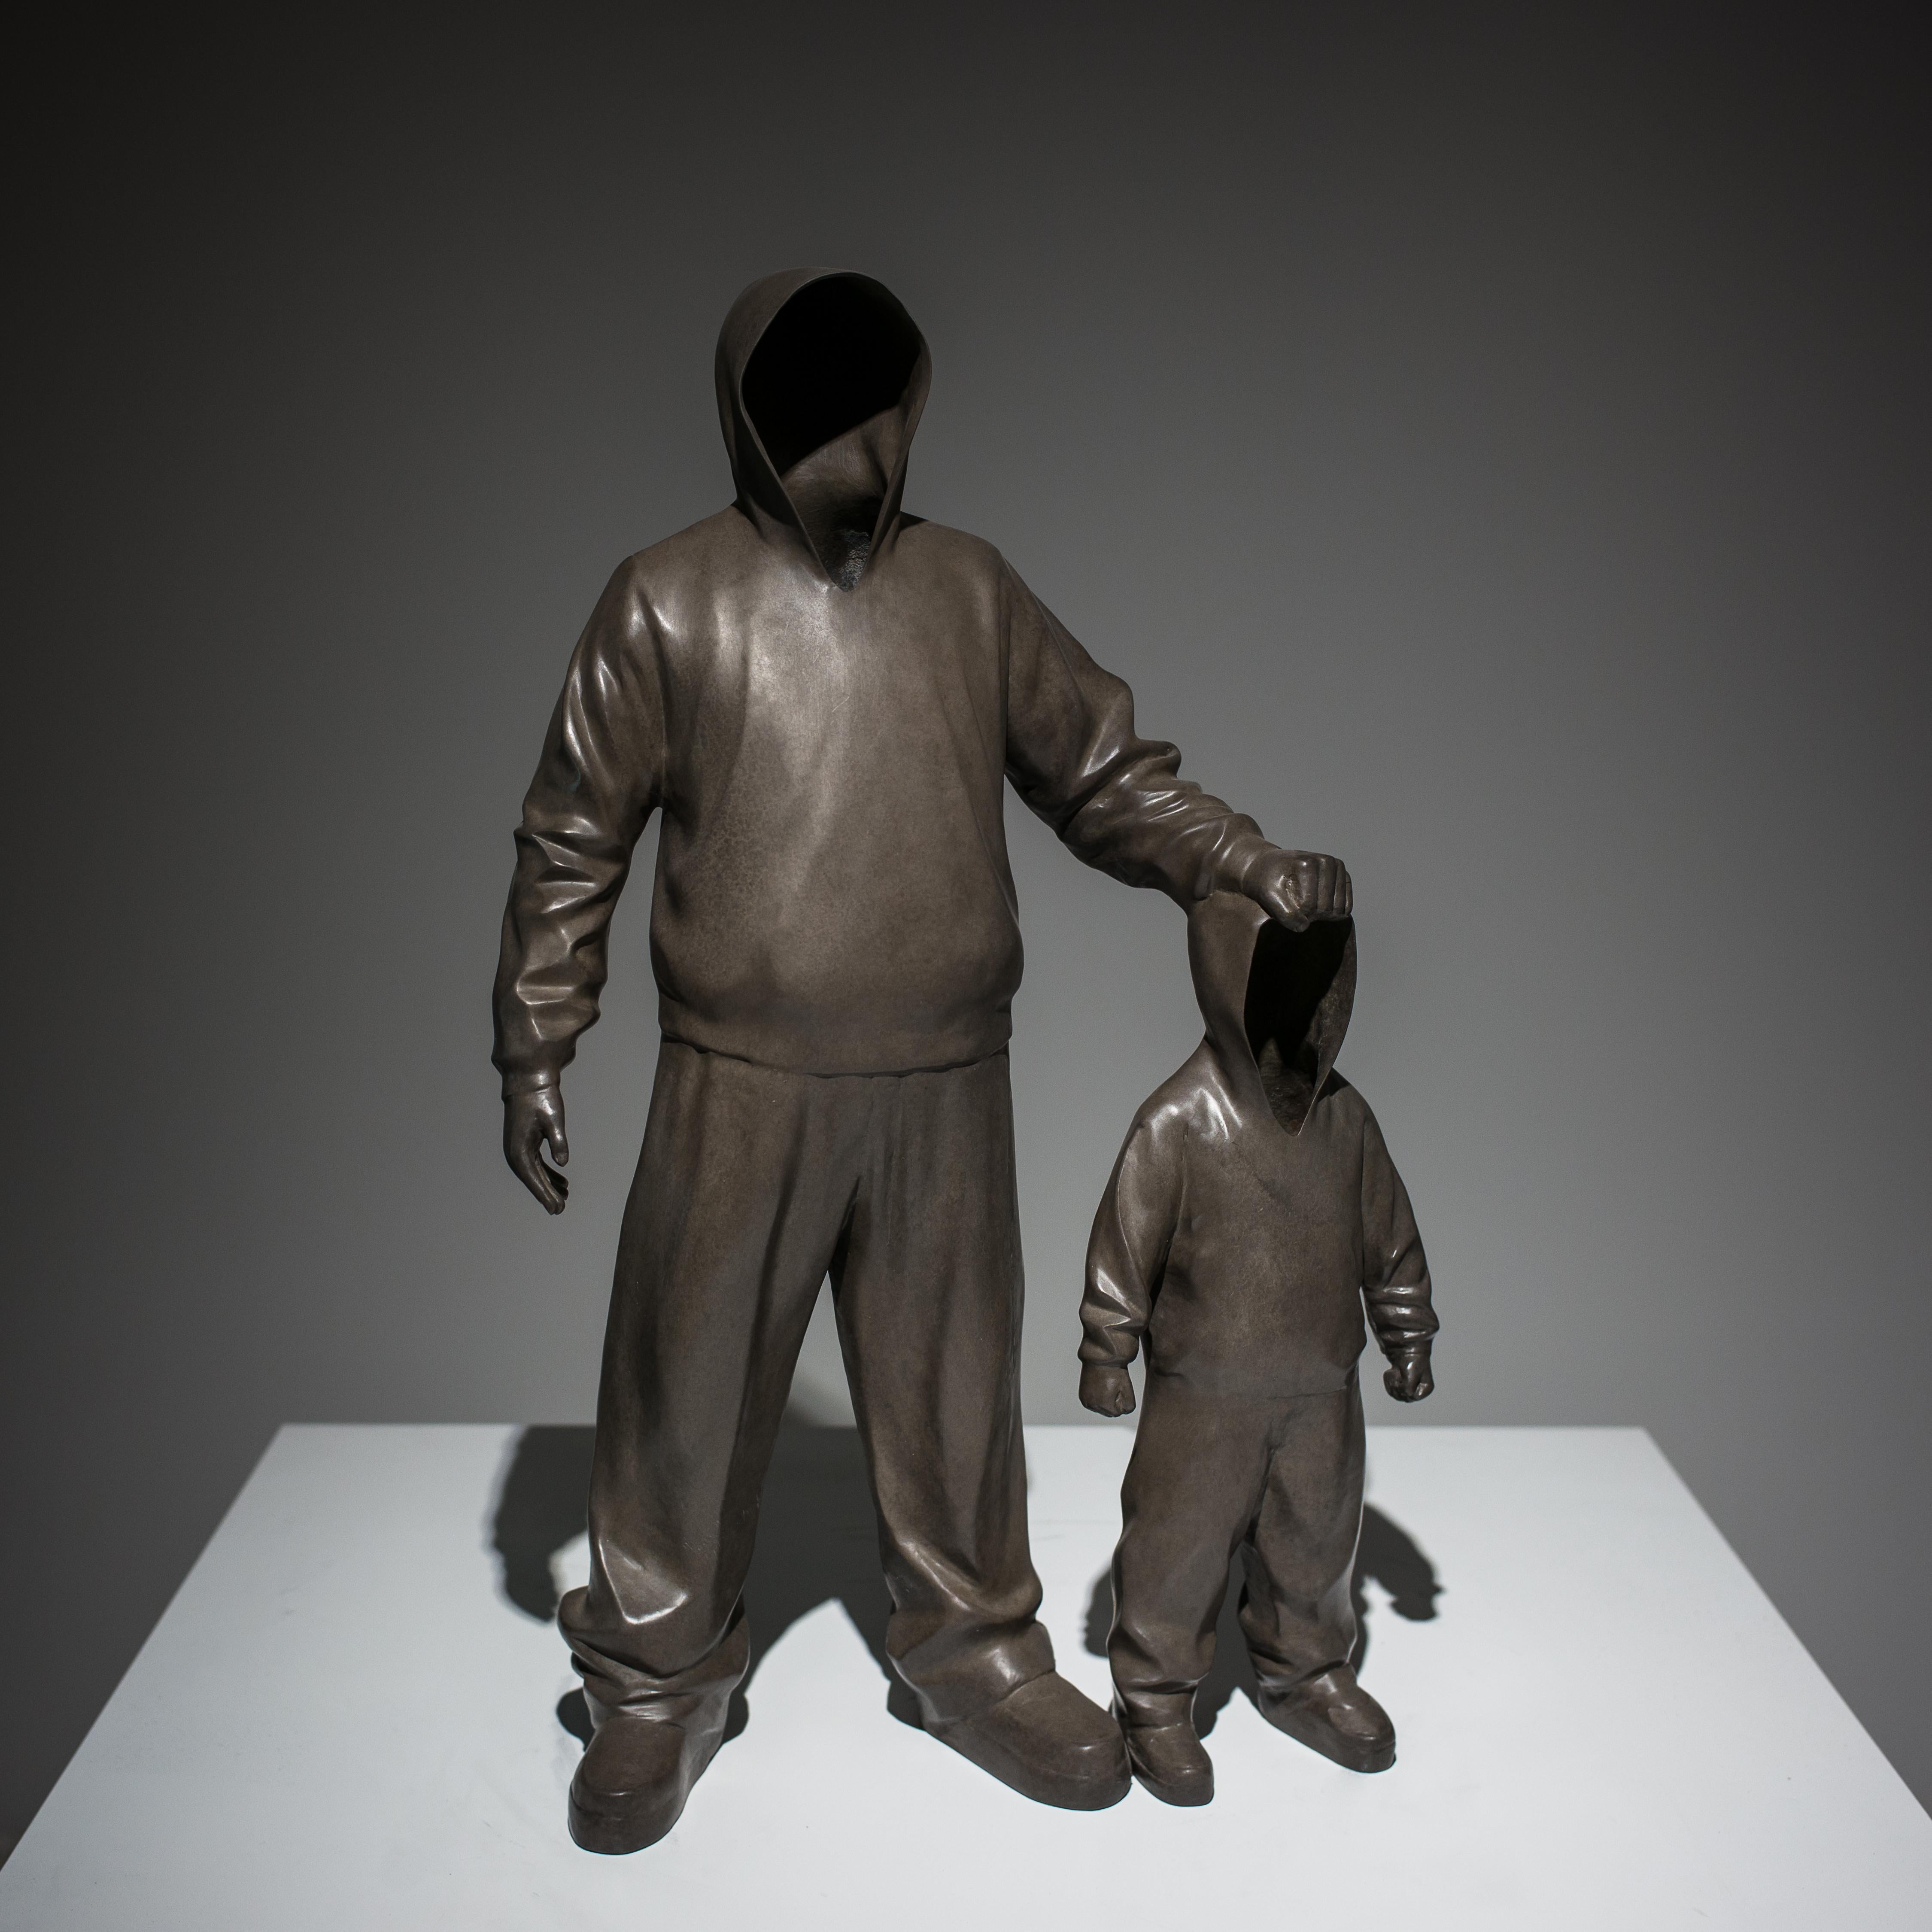 "The Godfather" Bronze Sculpture 28"x18"x7" inch Edition of 8 by Huang Yulong


ABOUT THE ARTIST
Huang Yulong was born in 1983 in Anhui Province, China. In 2007 he graduated with a Bachelor of Fine Arts in Sculpture from the Jingdezhen Ceramic